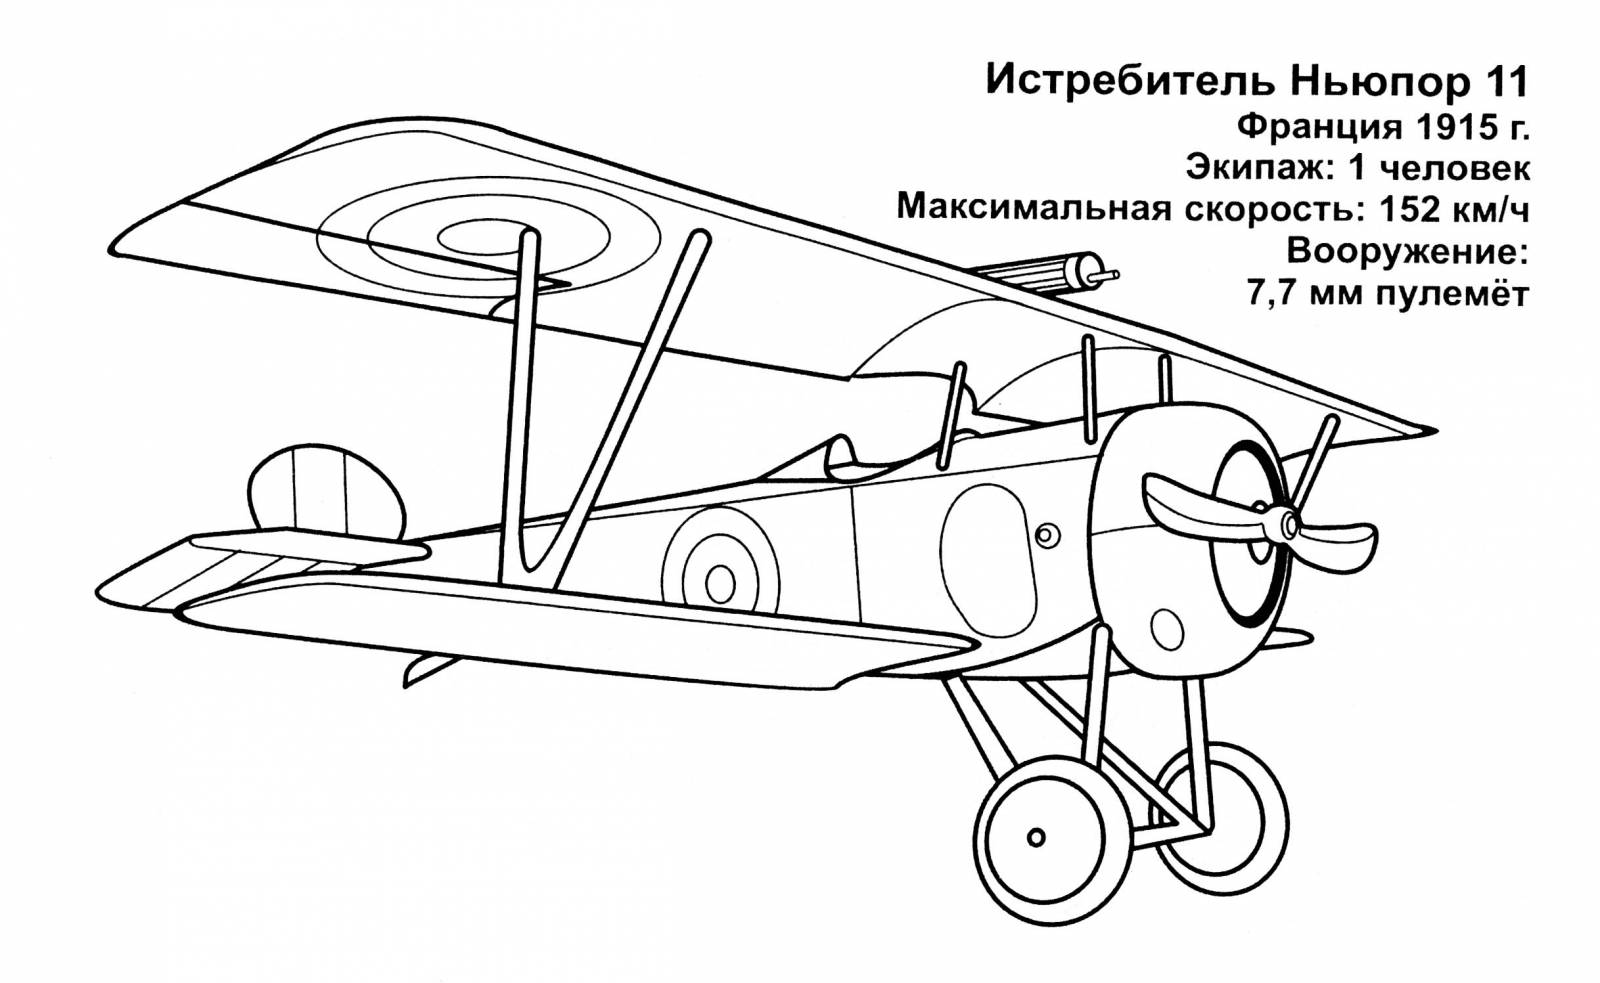 Ww1 Airplane Pages Coloring Pages